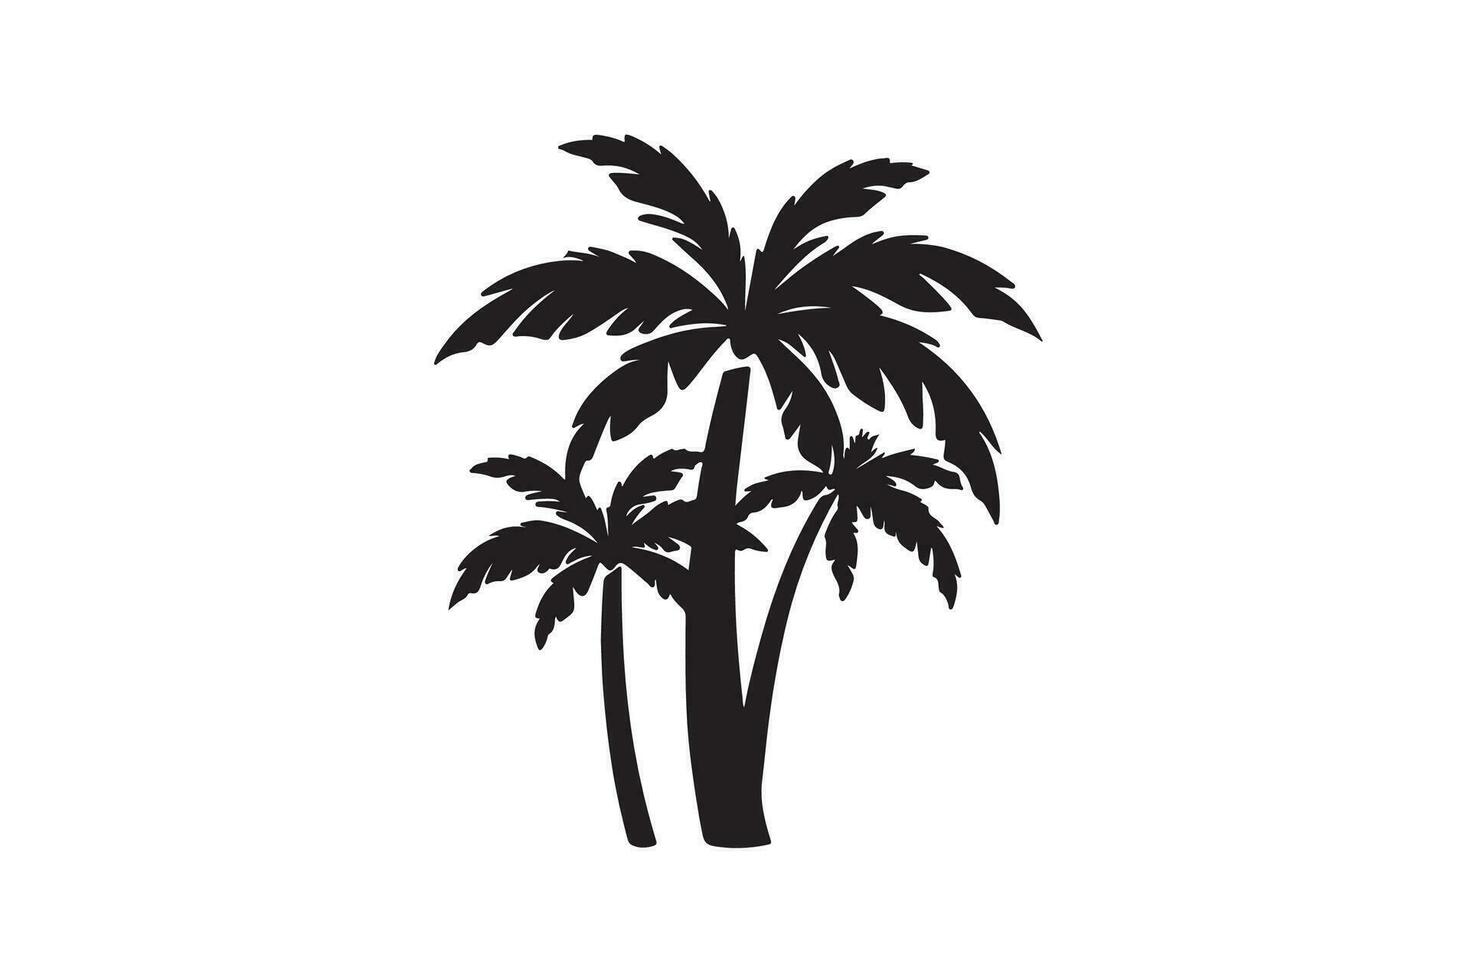 A black Silhouette Coconut tree Clipart on a white background vector